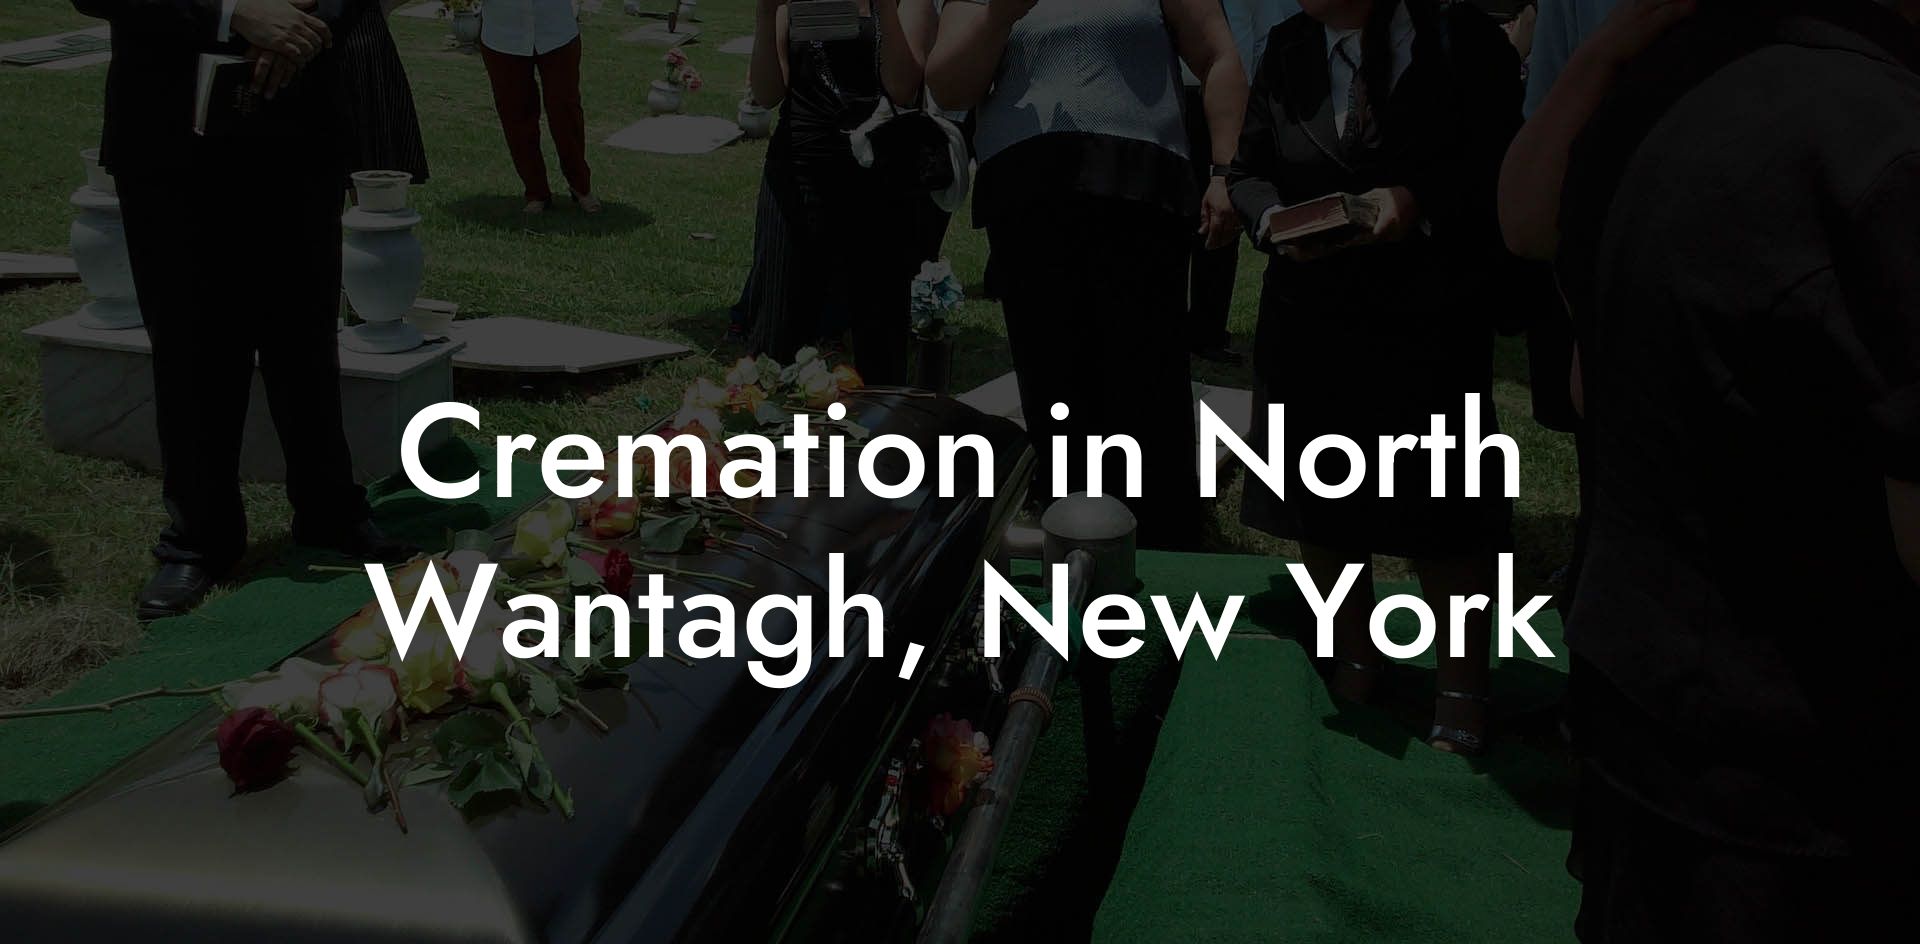 Cremation in North Wantagh, New York